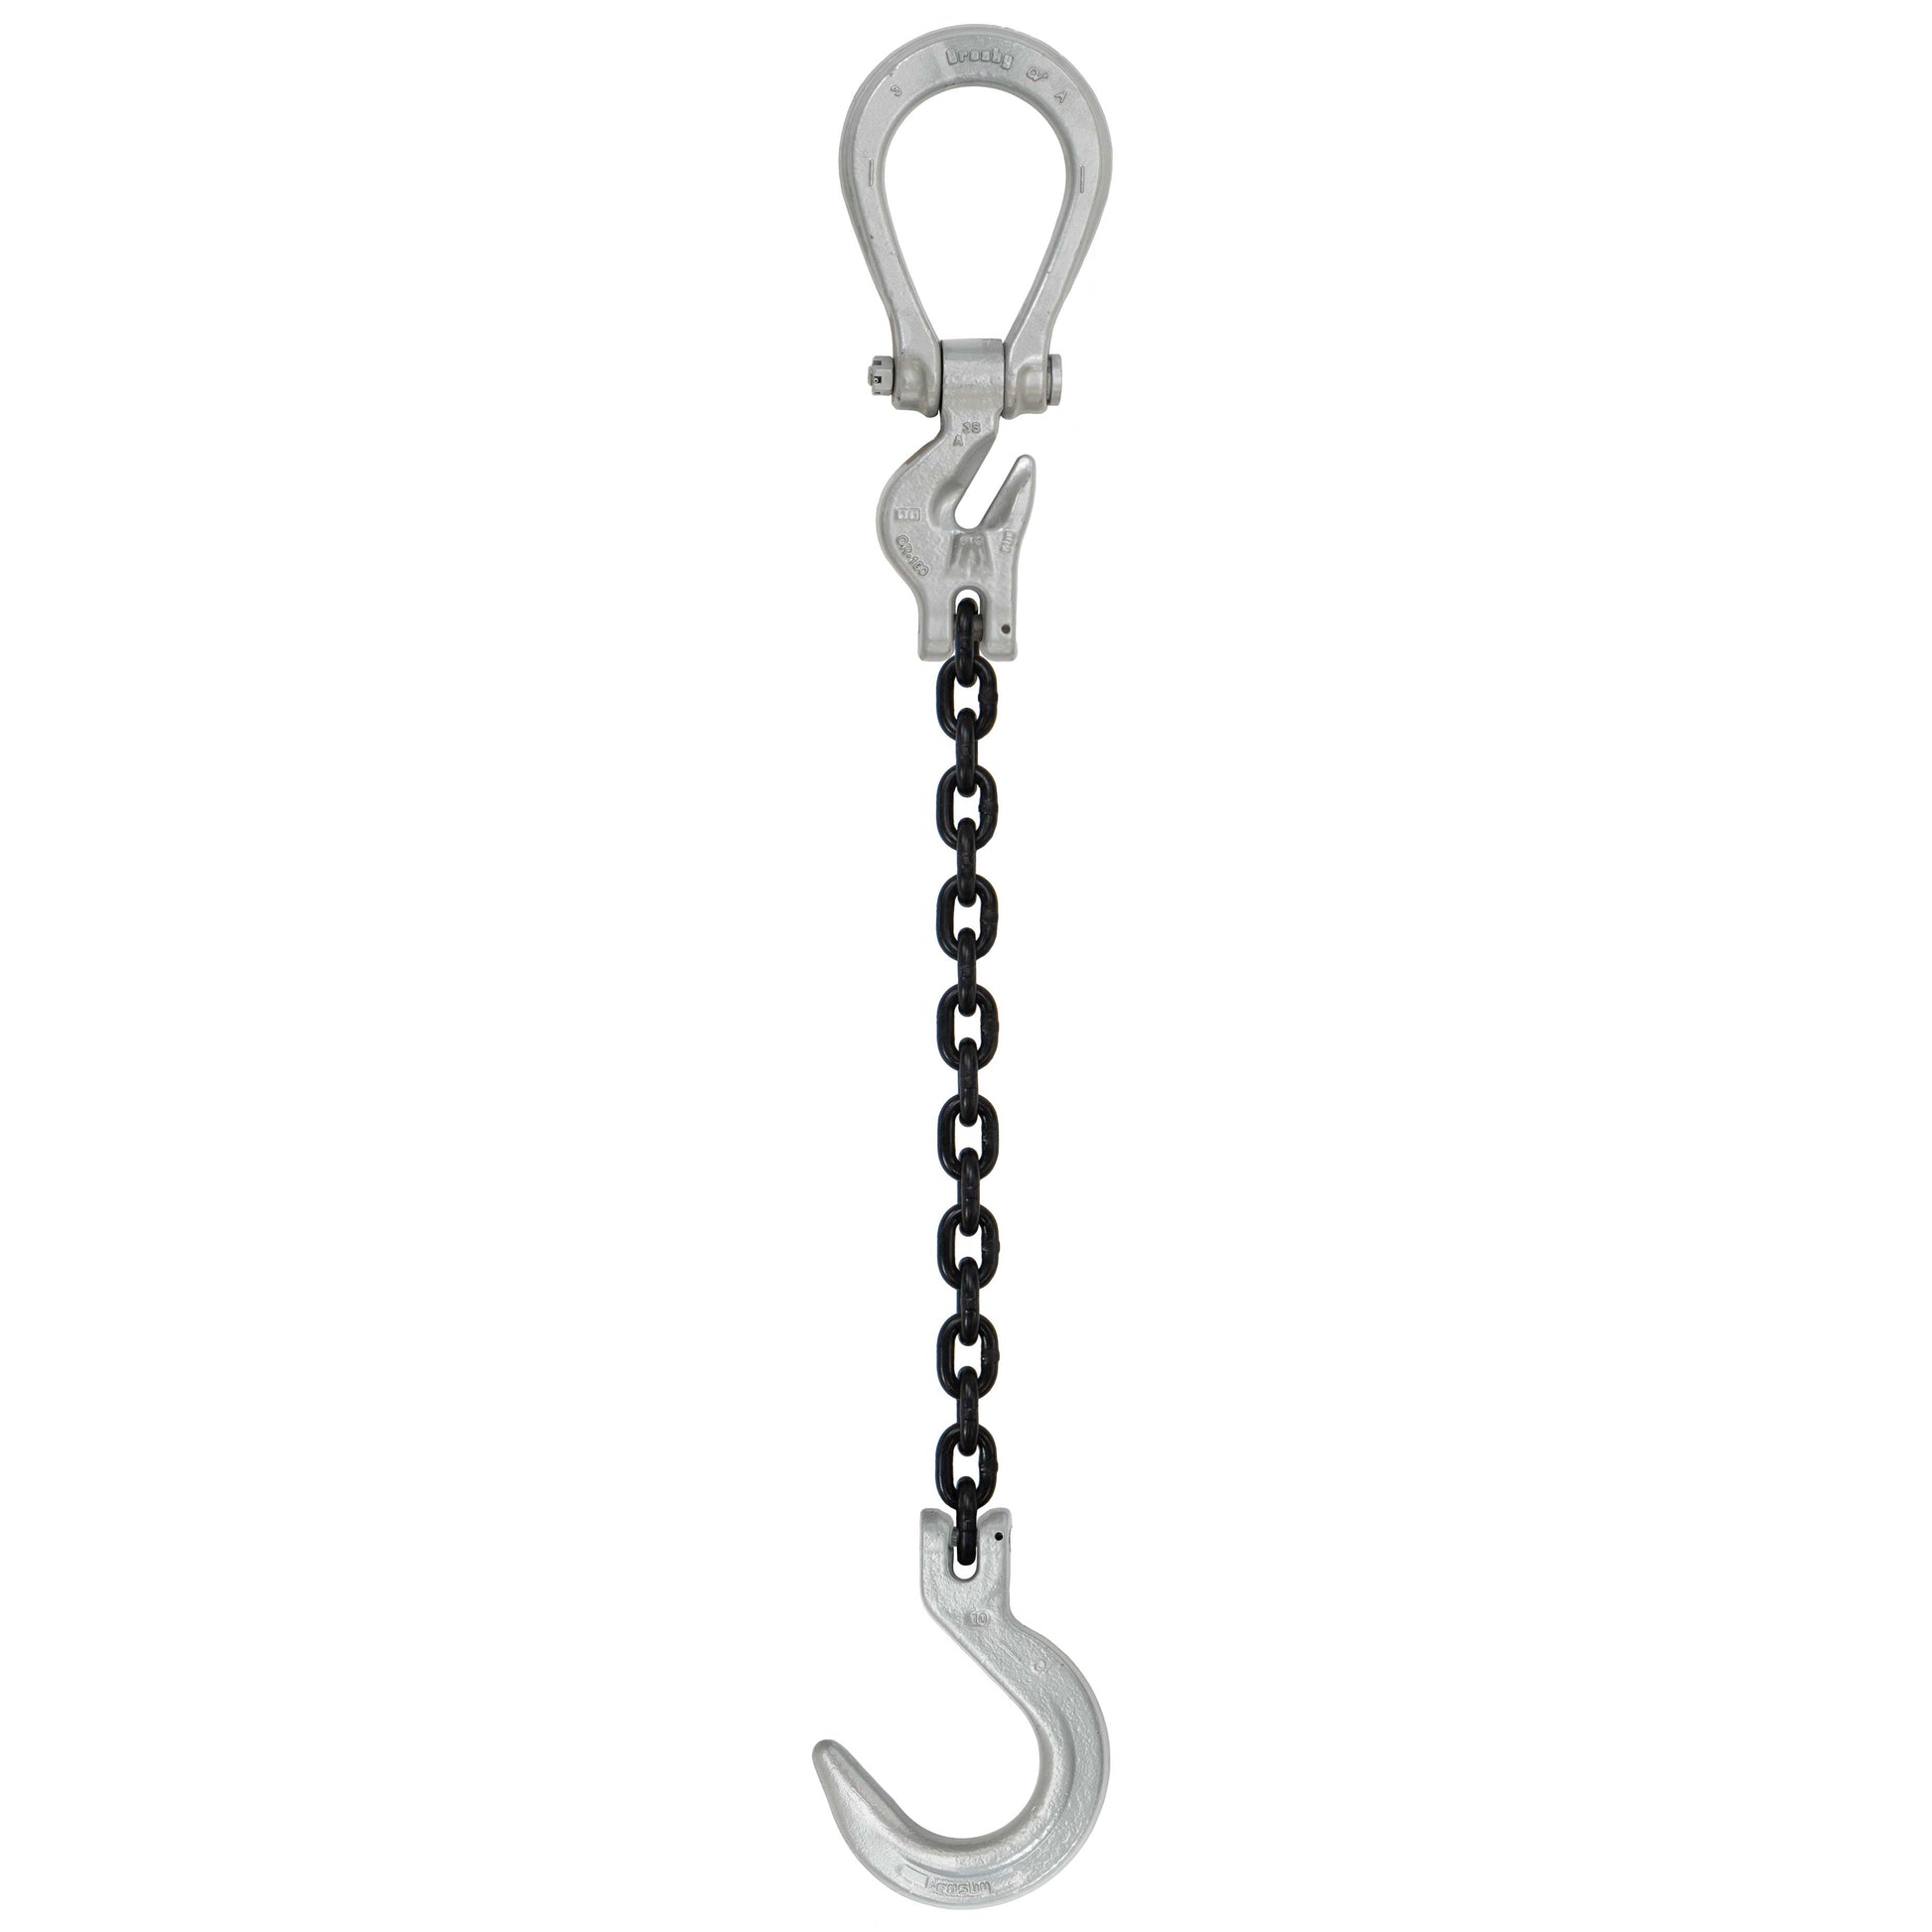 38 inch x 20 foot Domestic Adjustable Single Leg Chain Sling w Crosby Foundry Hook Grade 100 image 1 of 2